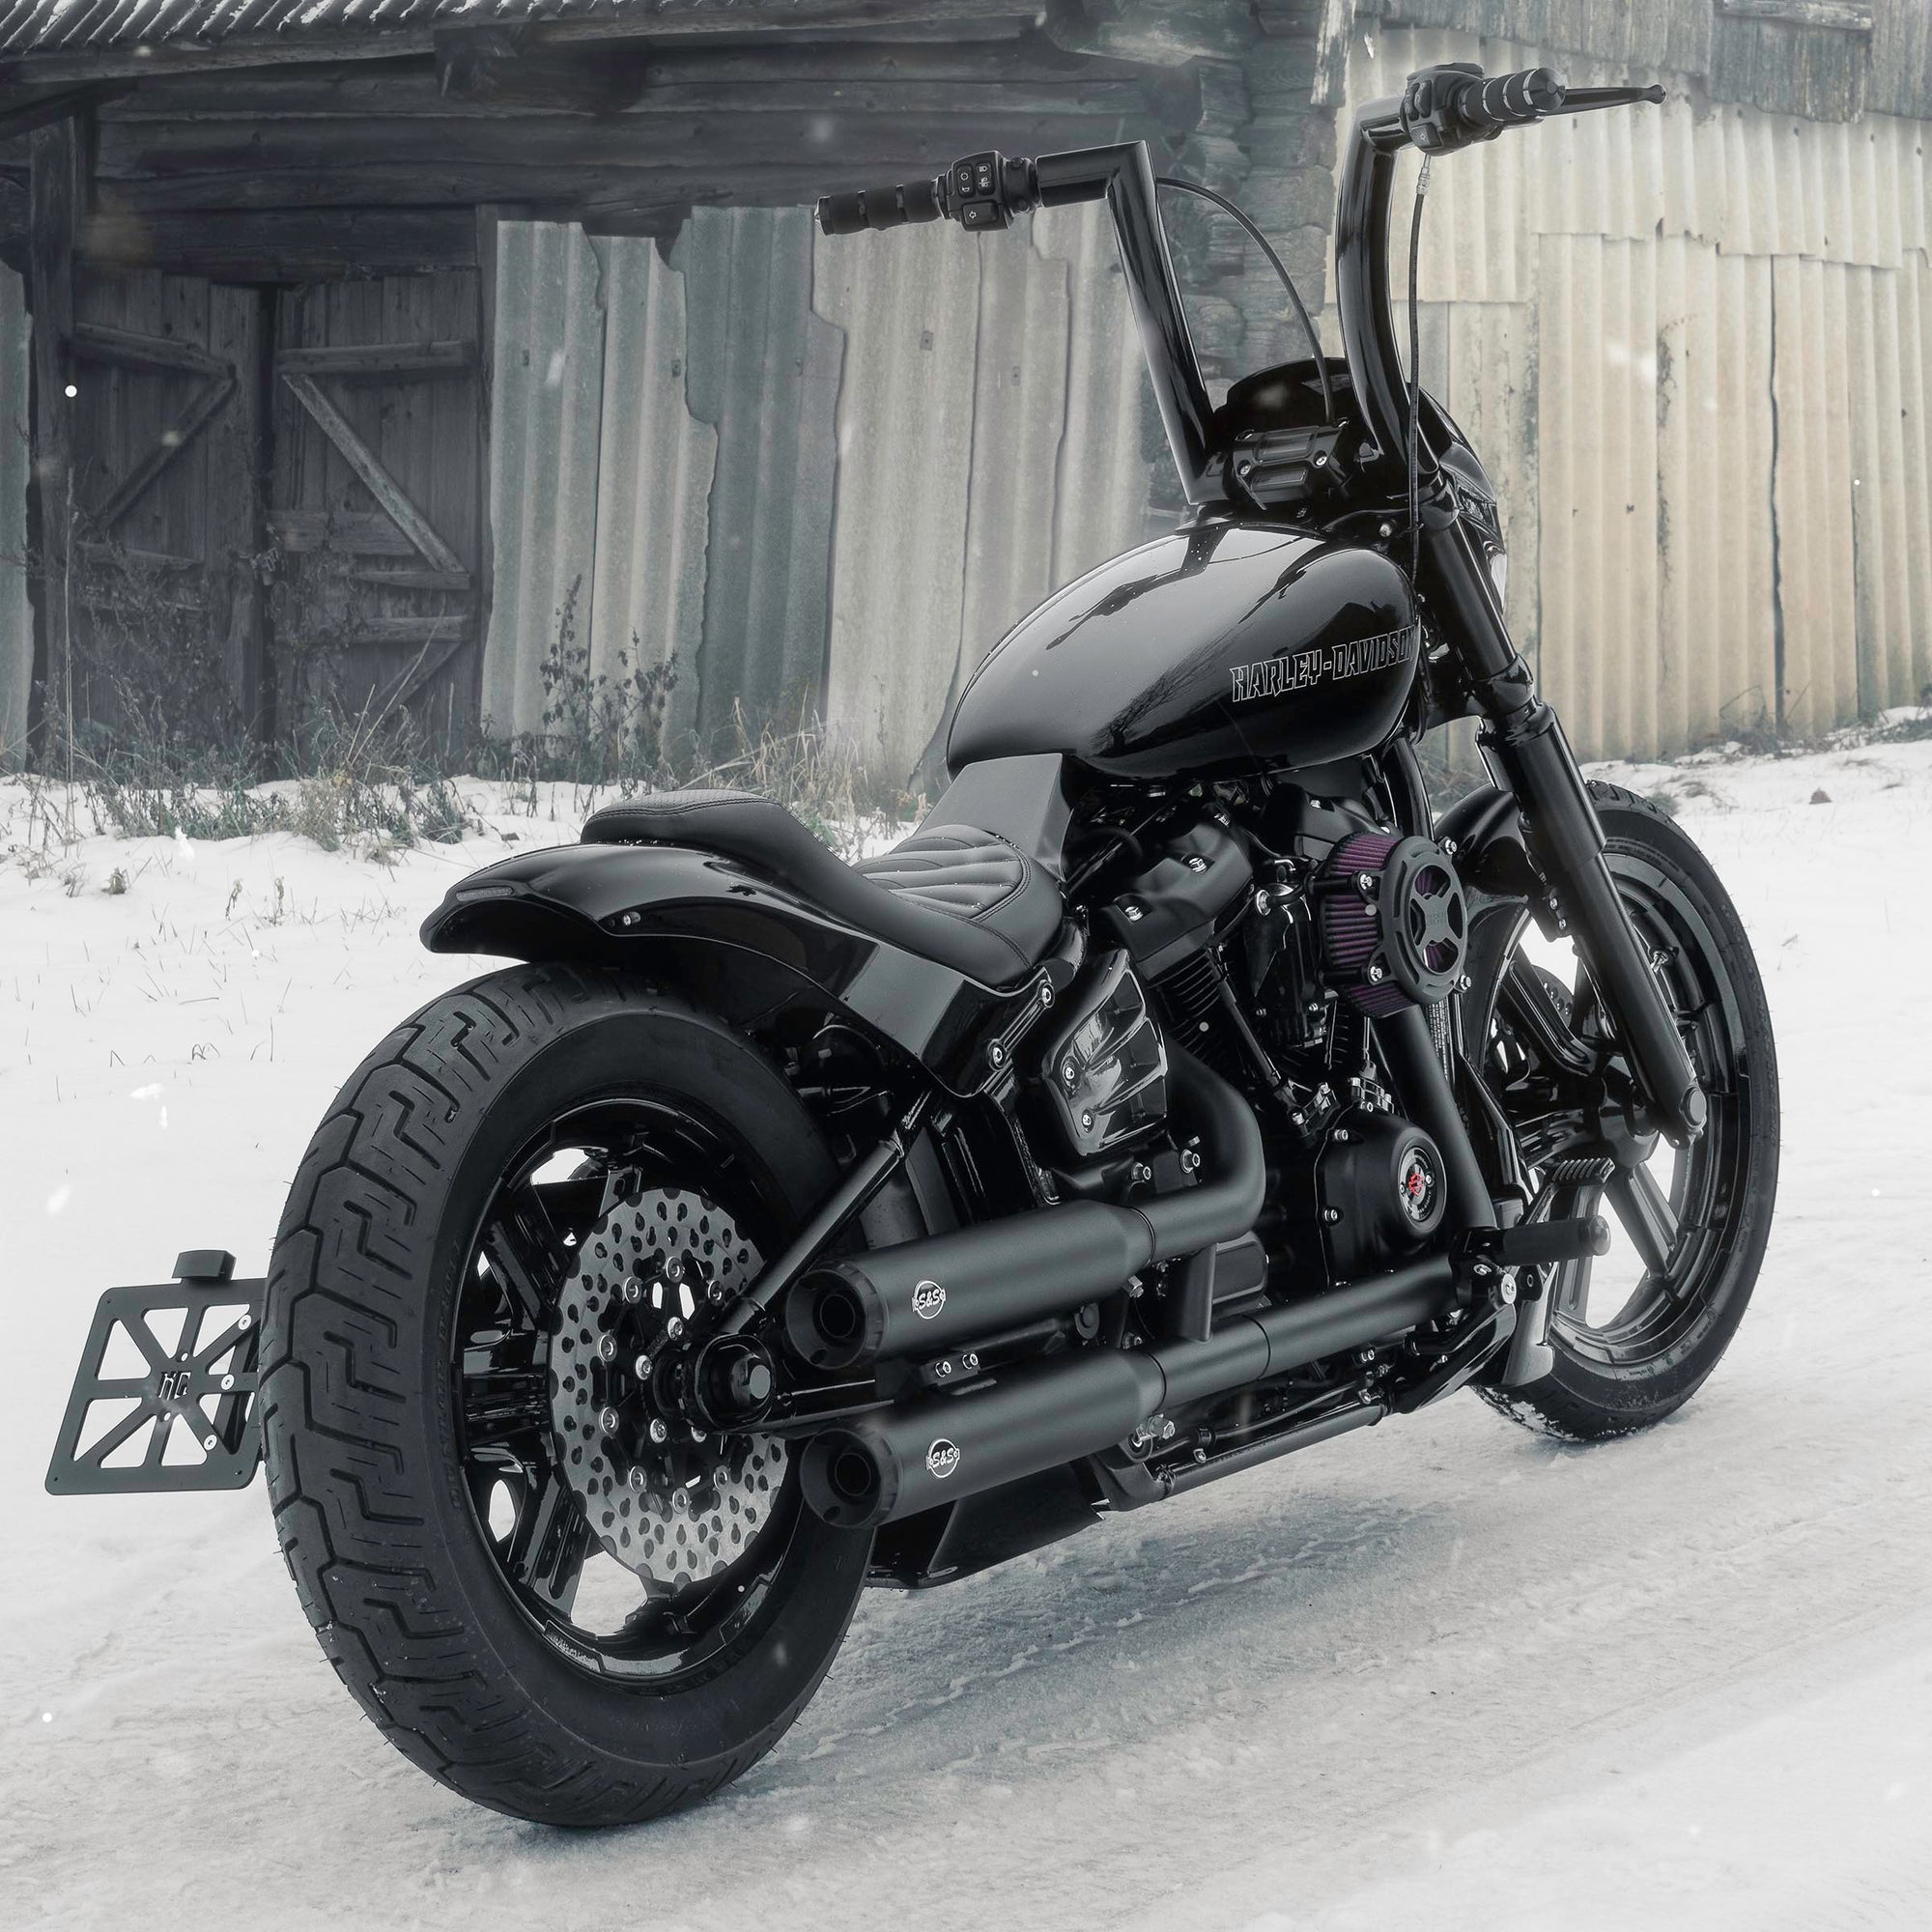 Harley Davidson Softail motorcycle with Killer Custom parts form the rear outside on a snowy day with an abandoned shack in the background